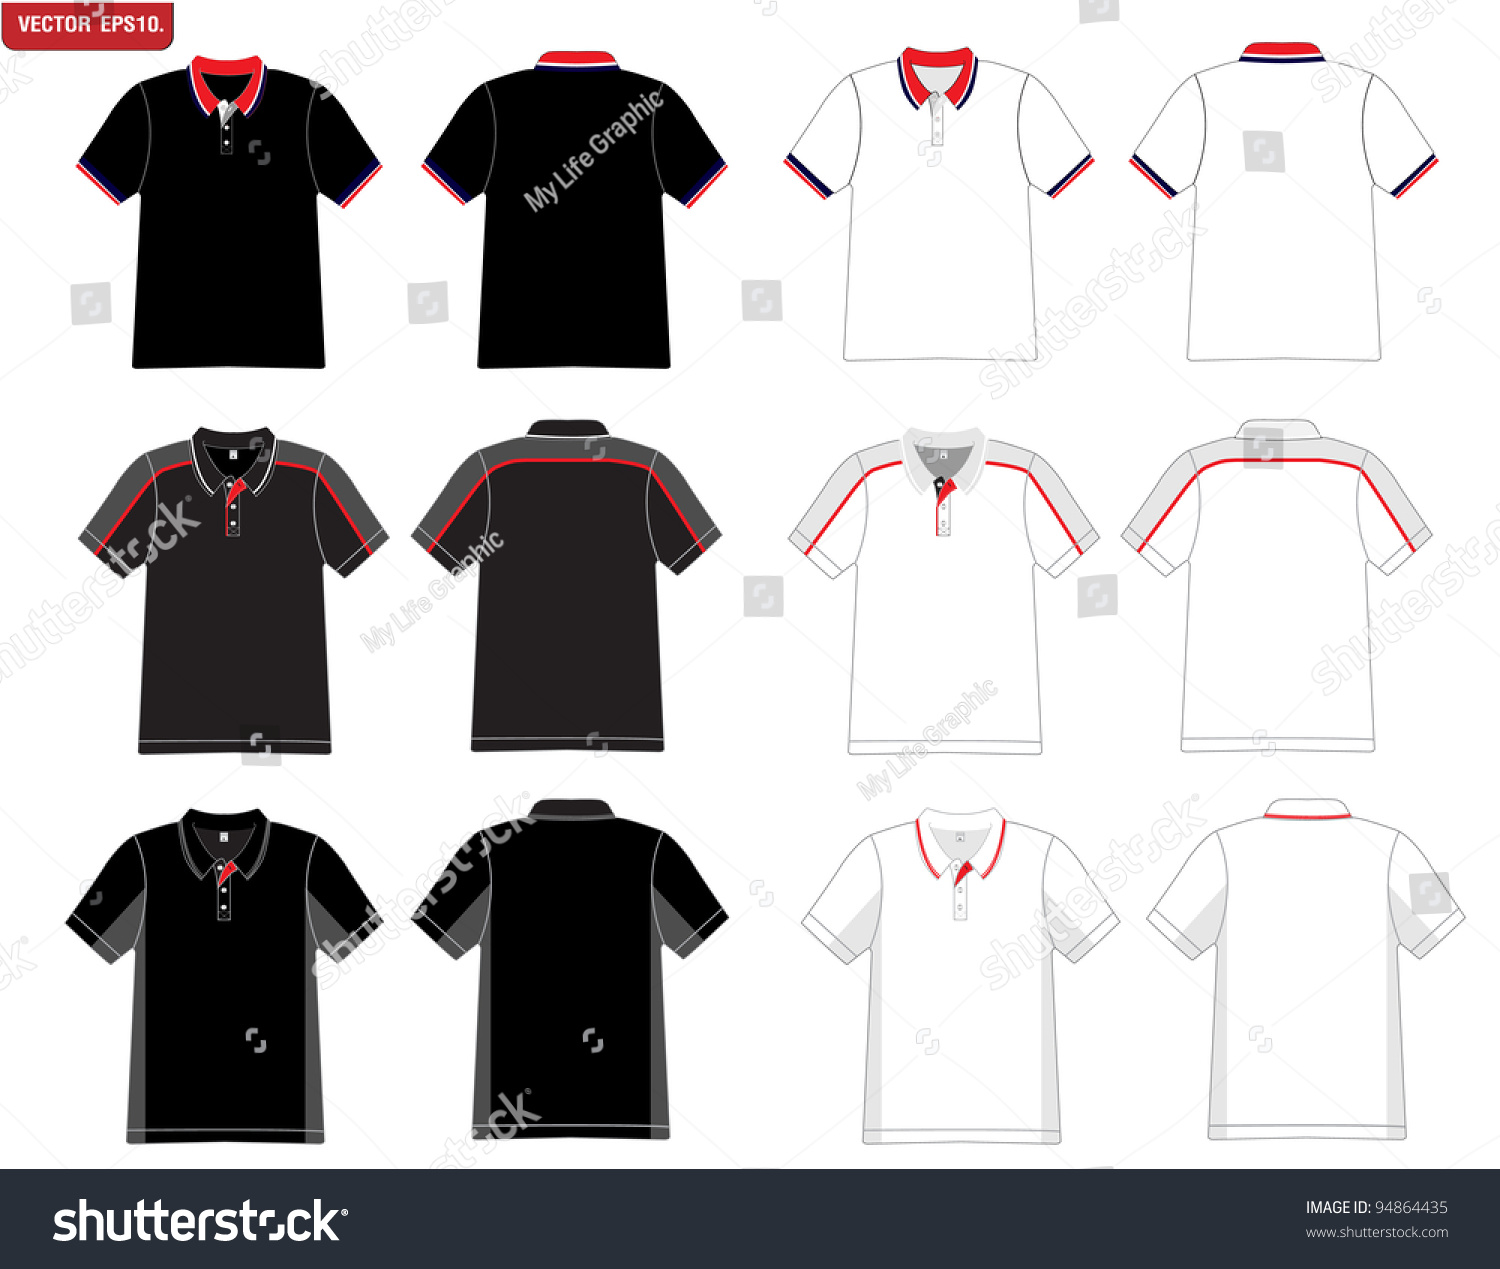 Vector. Men'S Black And White Polo Shirt Template. - 94864435 ...